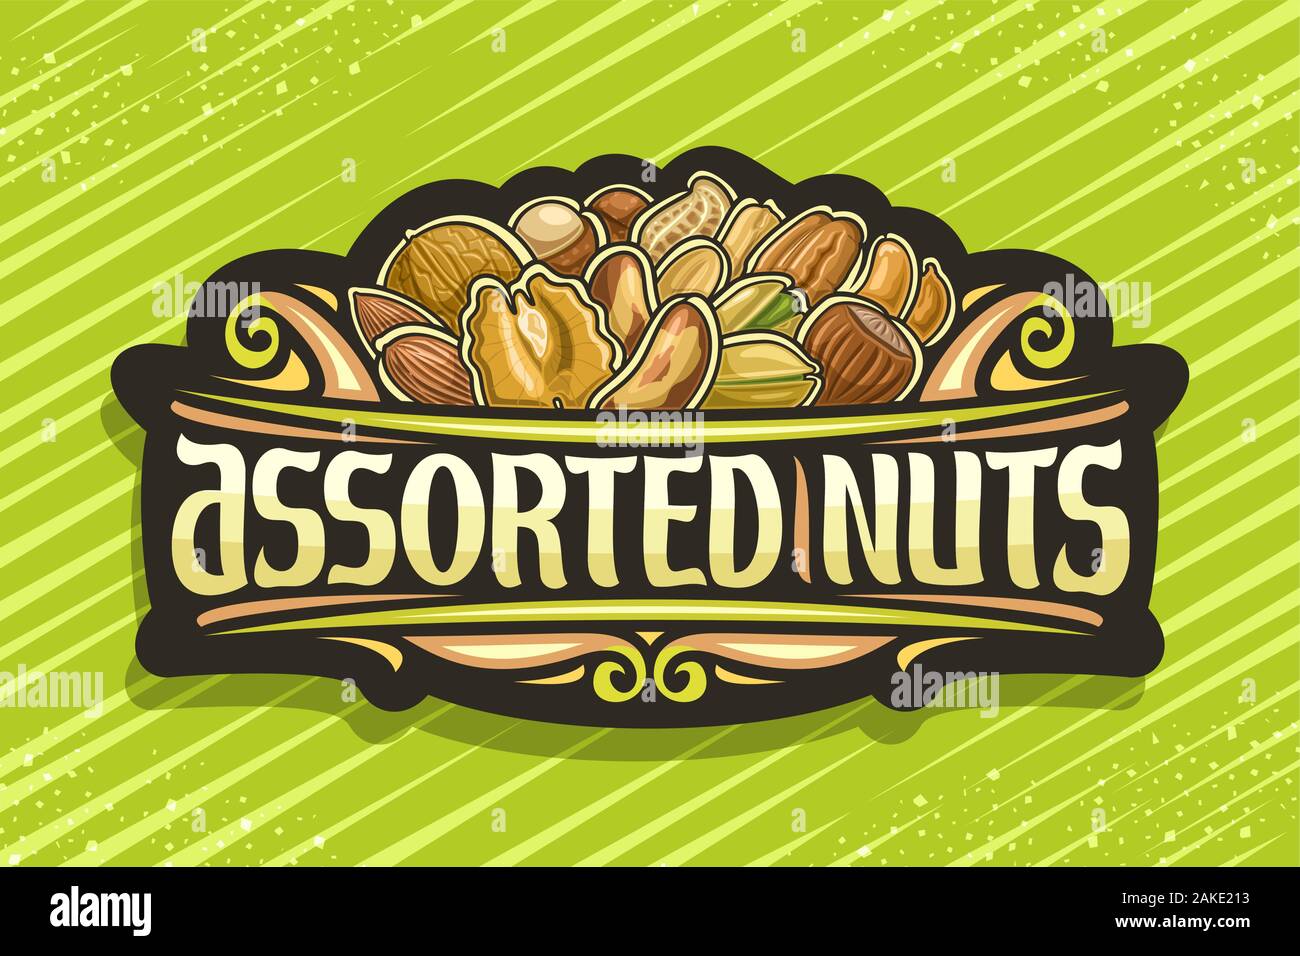 Vector logo for Assorted Nuts, black decorative sign with illustration of heap cartoon diverse nuts and flourishes, design signboard with original typ Stock Vector